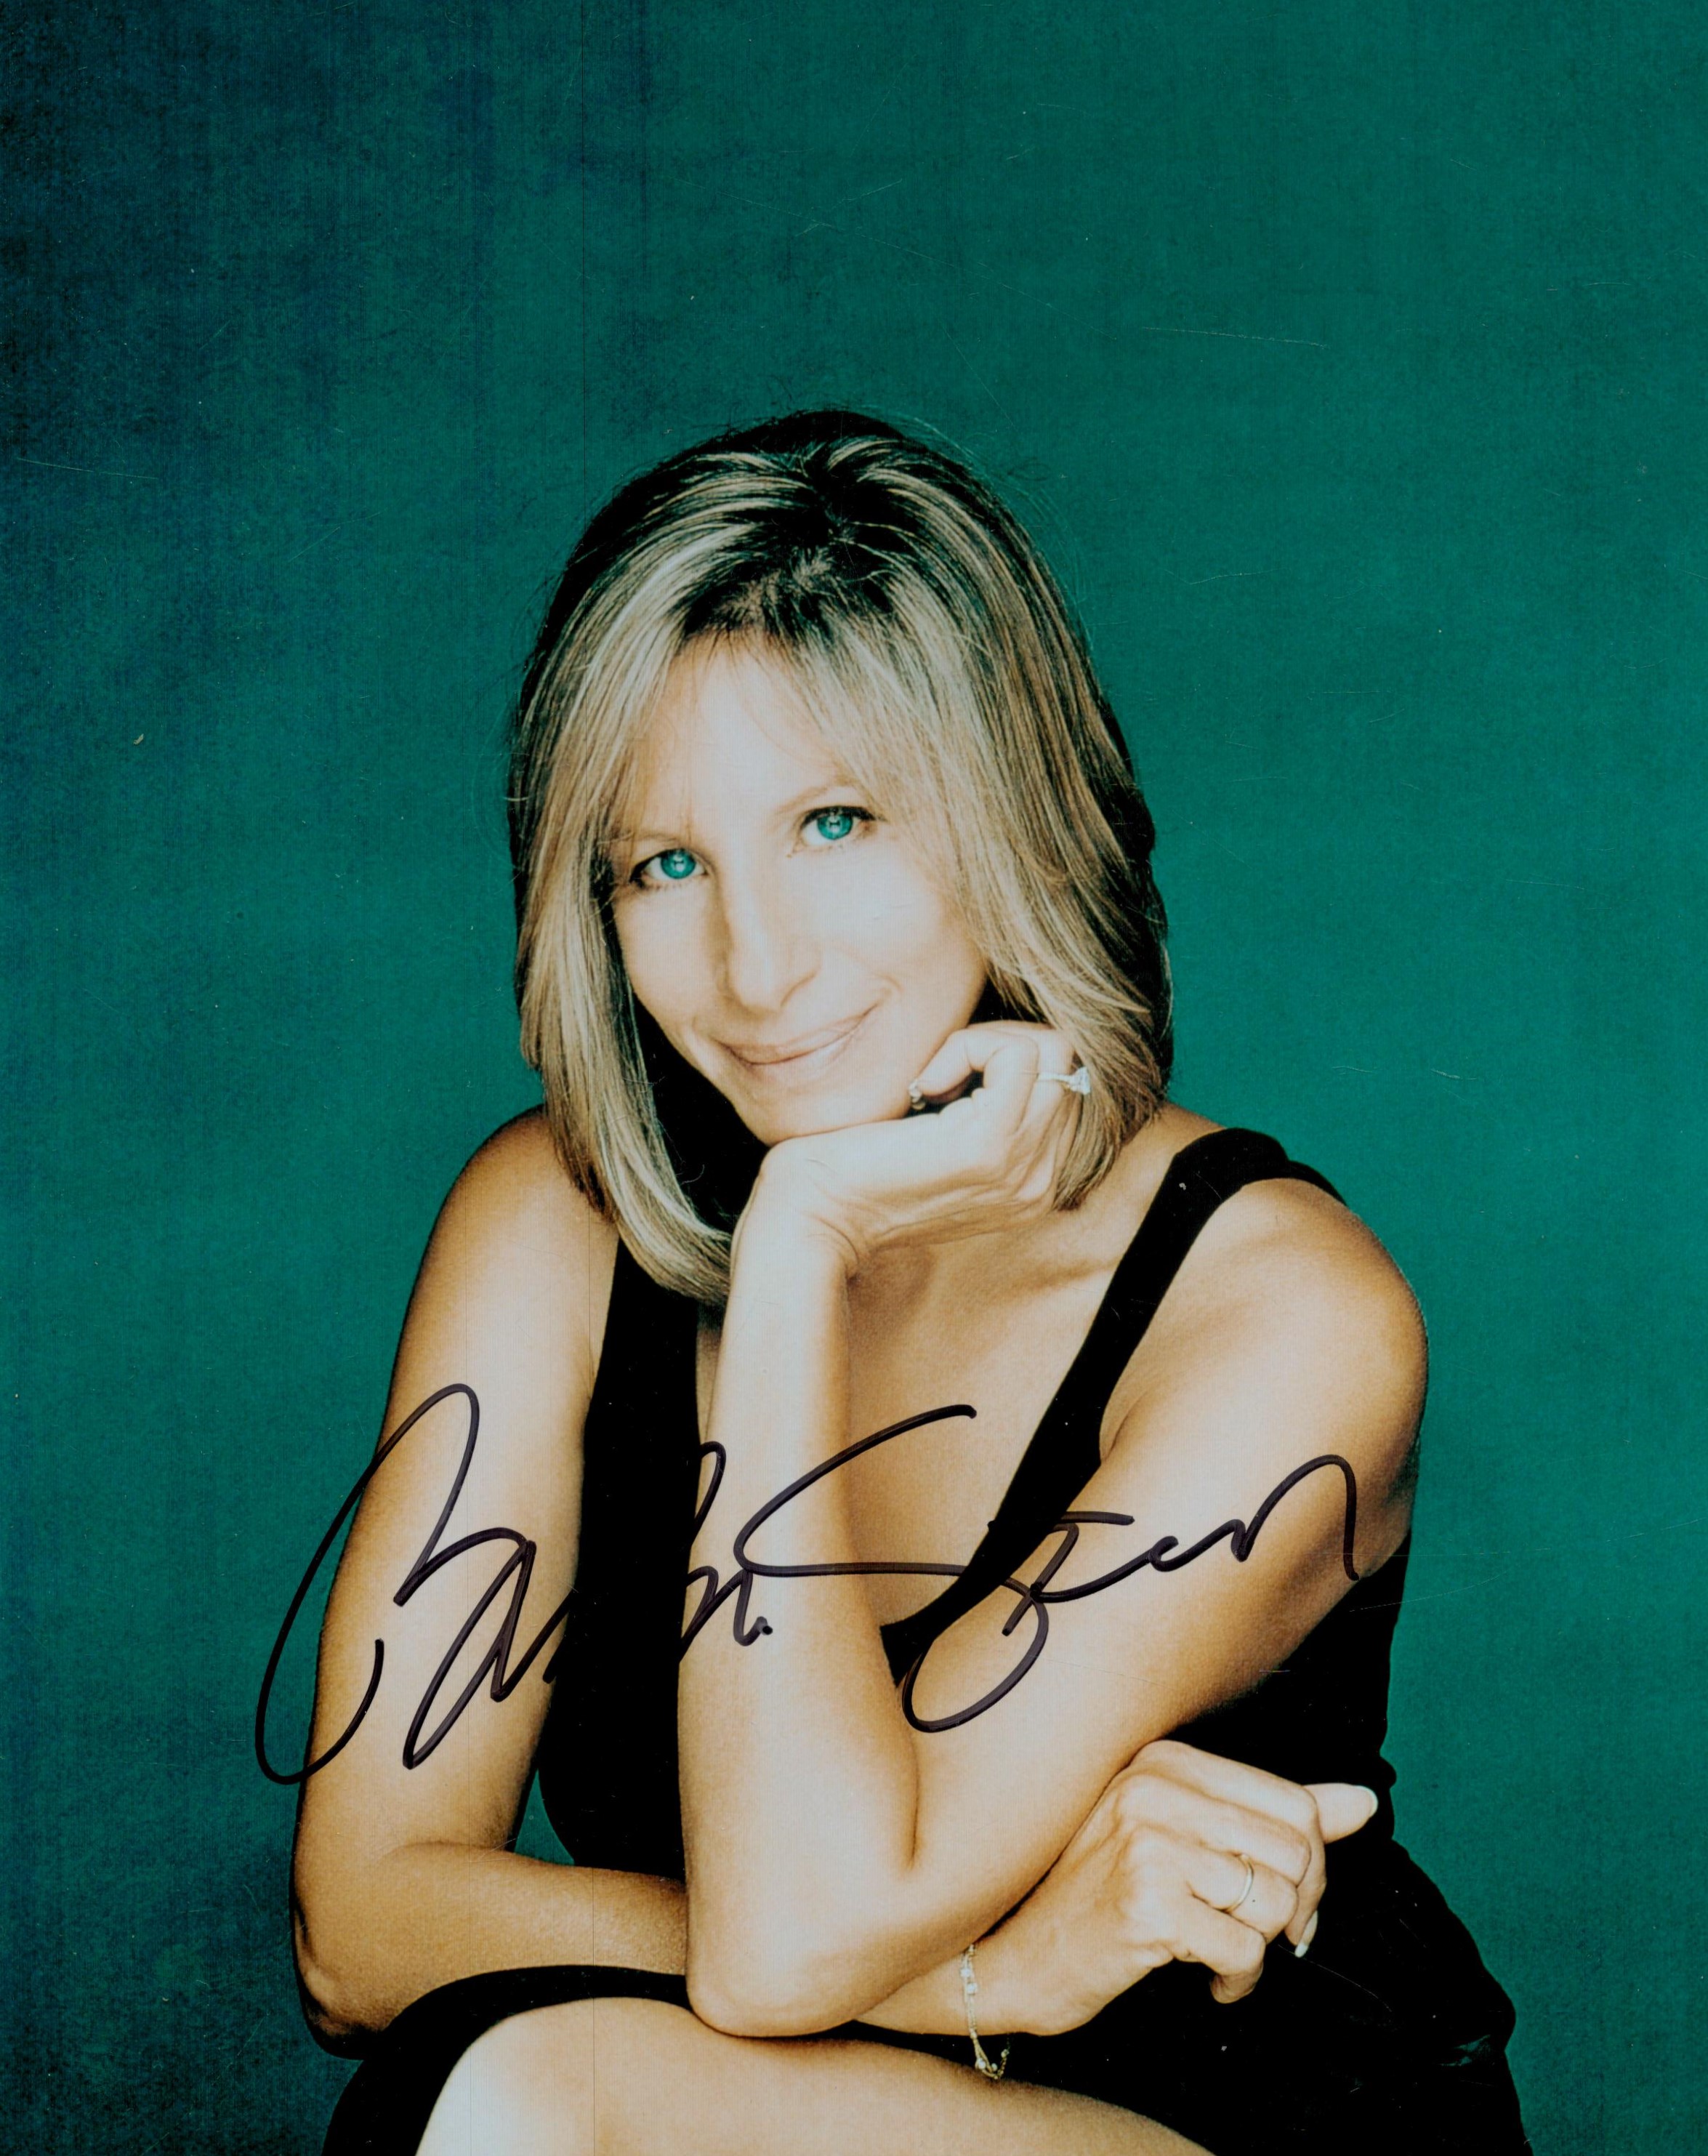 Barbara Streisand signed 10x8 inch colour photo. Good condition. All autographs come with a